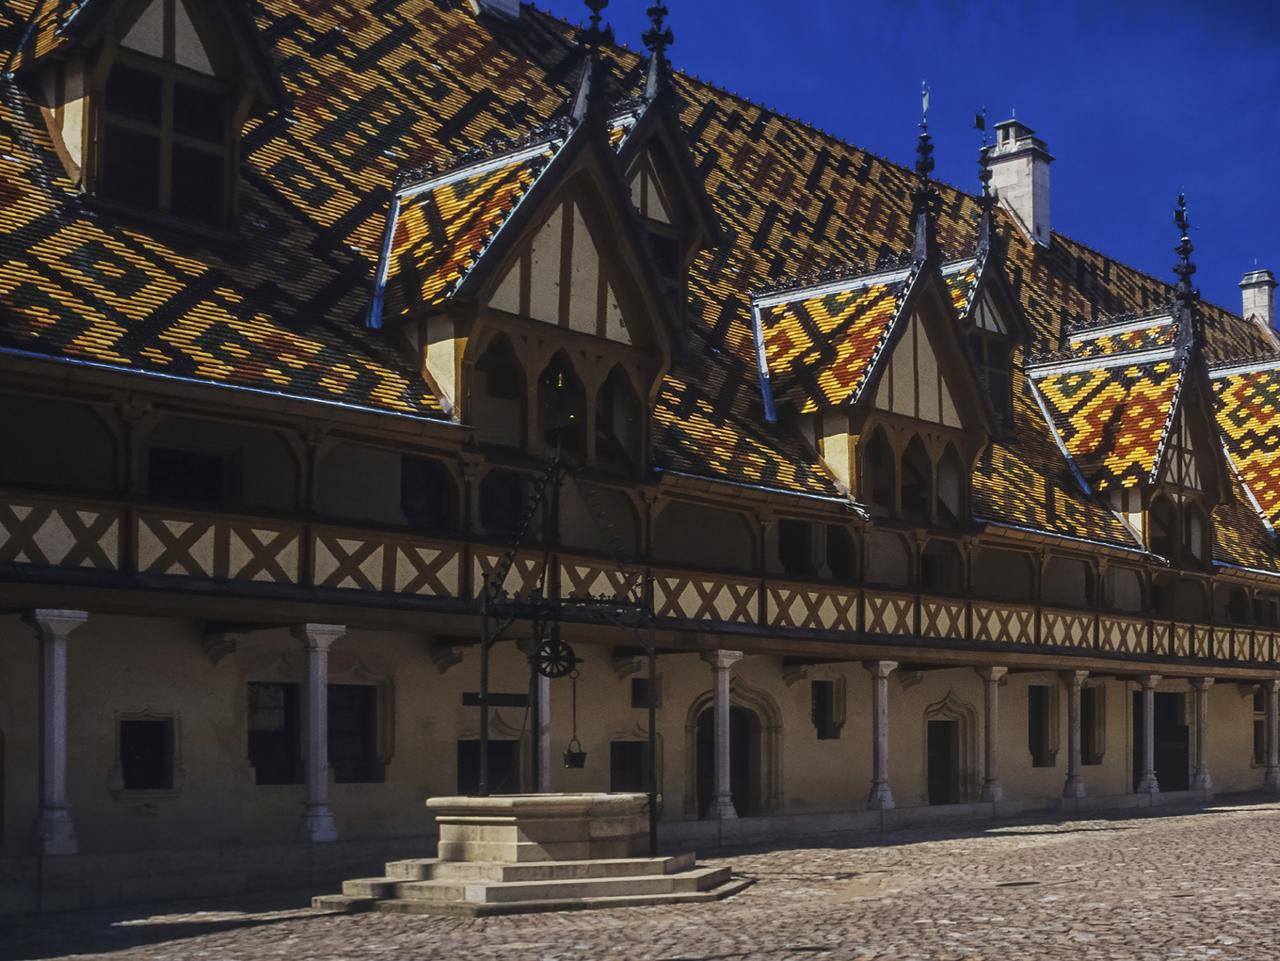 The hospice at beaune in the cote d'or department of Burgundy, France, Multi-coloured roof tiles. Picture: istock